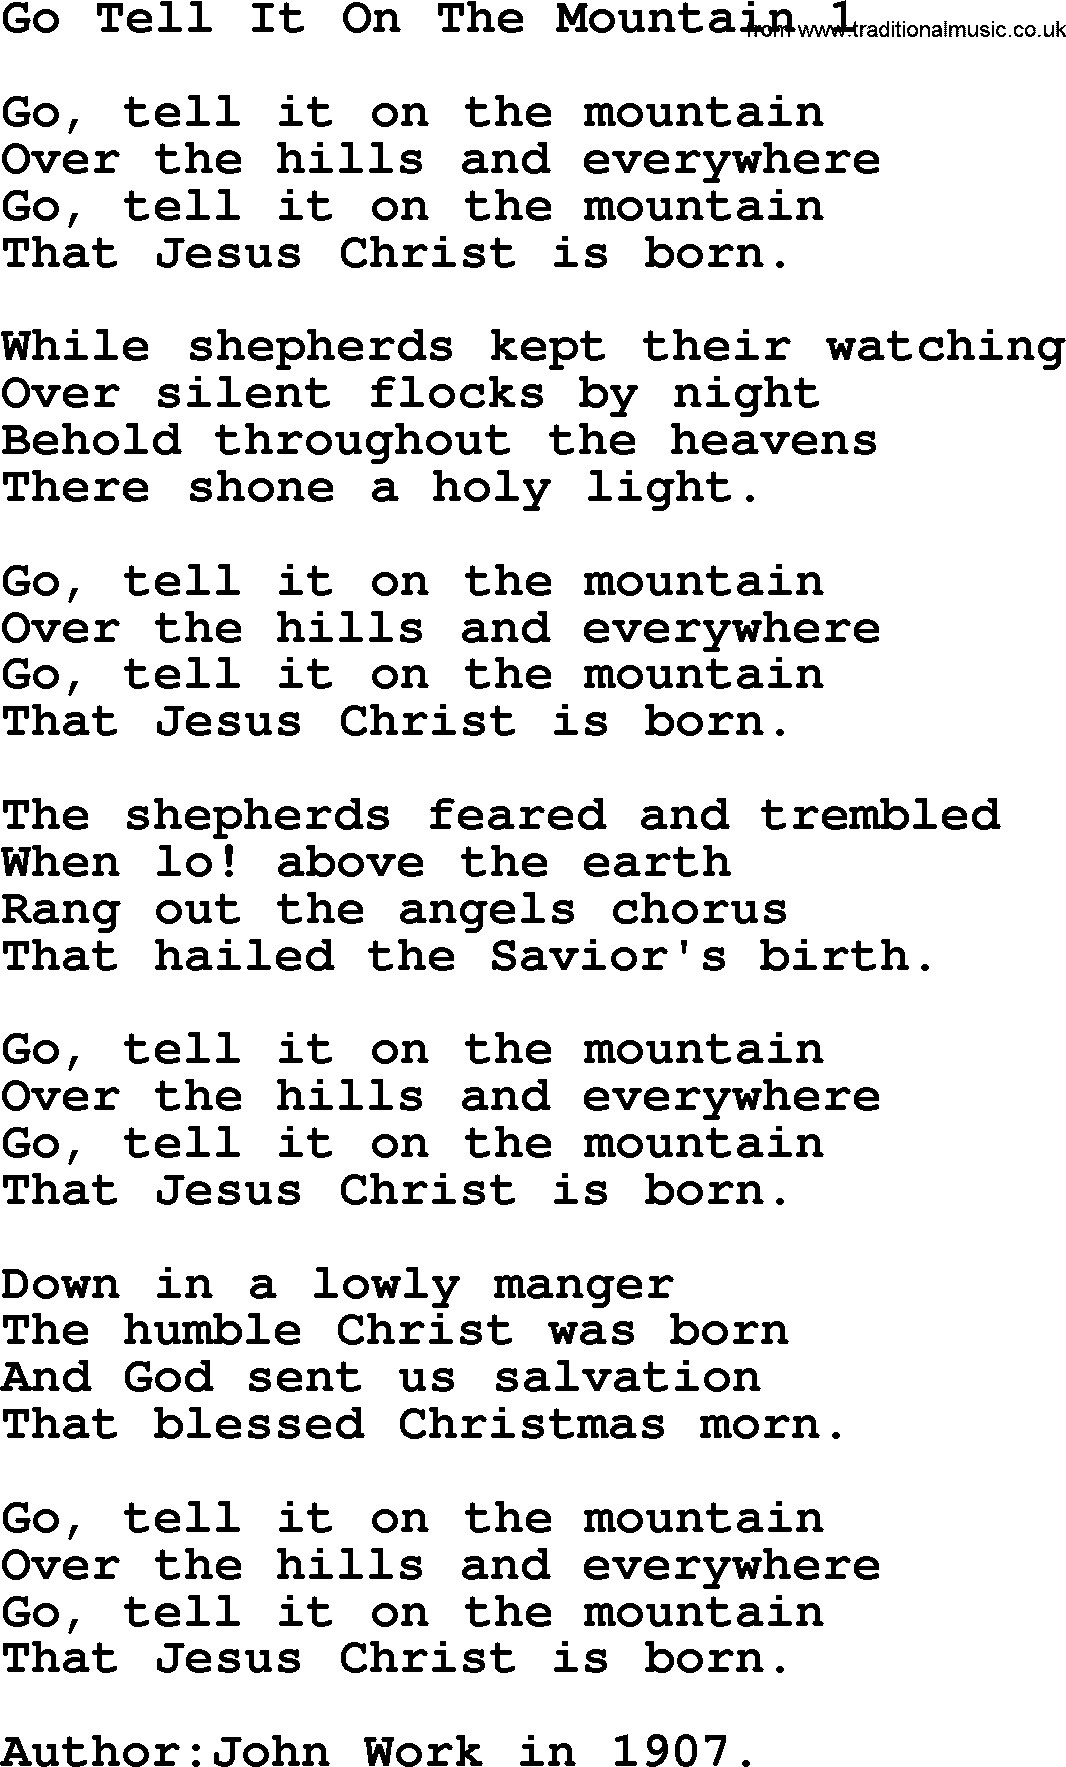 Christmas Powerpoints, Song Go Tell It On The Mountain 1 Lyrics, PPT